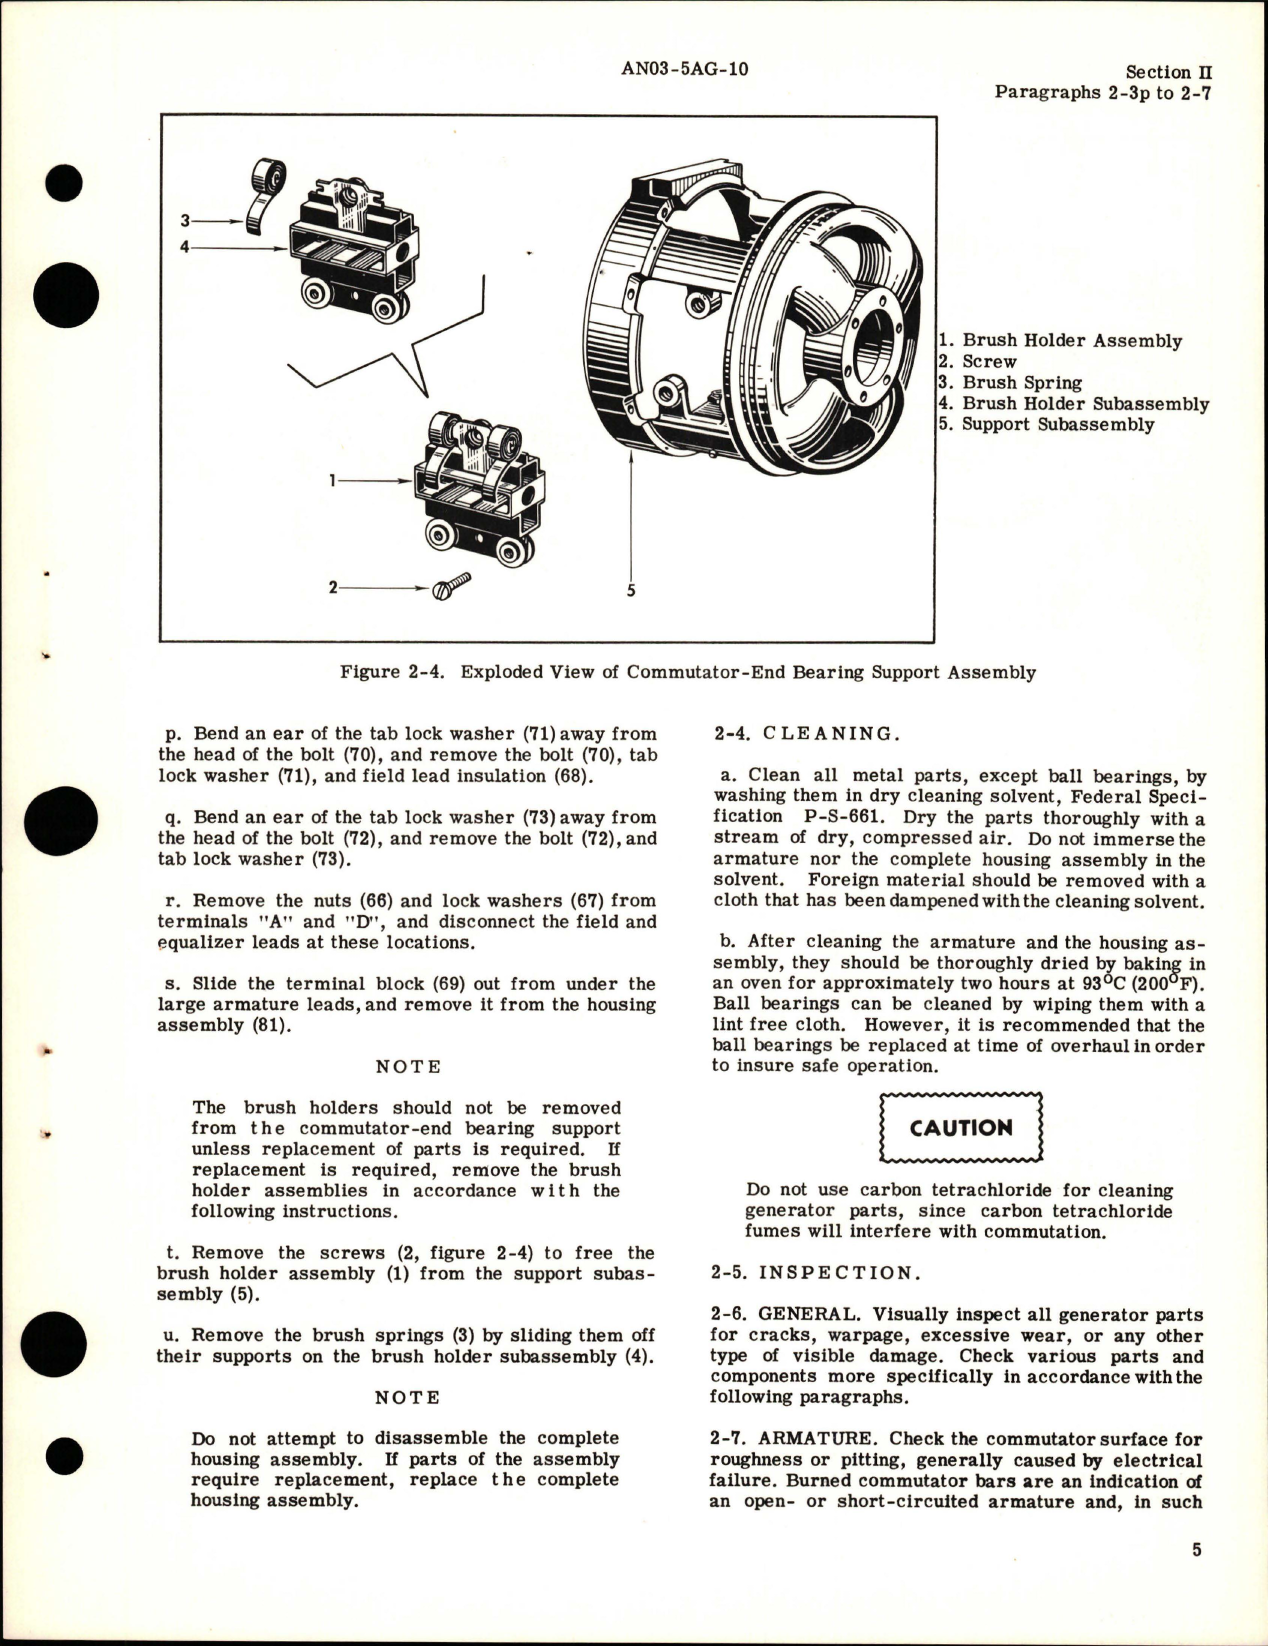 Sample page 9 from AirCorps Library document: Overhaul Instructions for Generator 